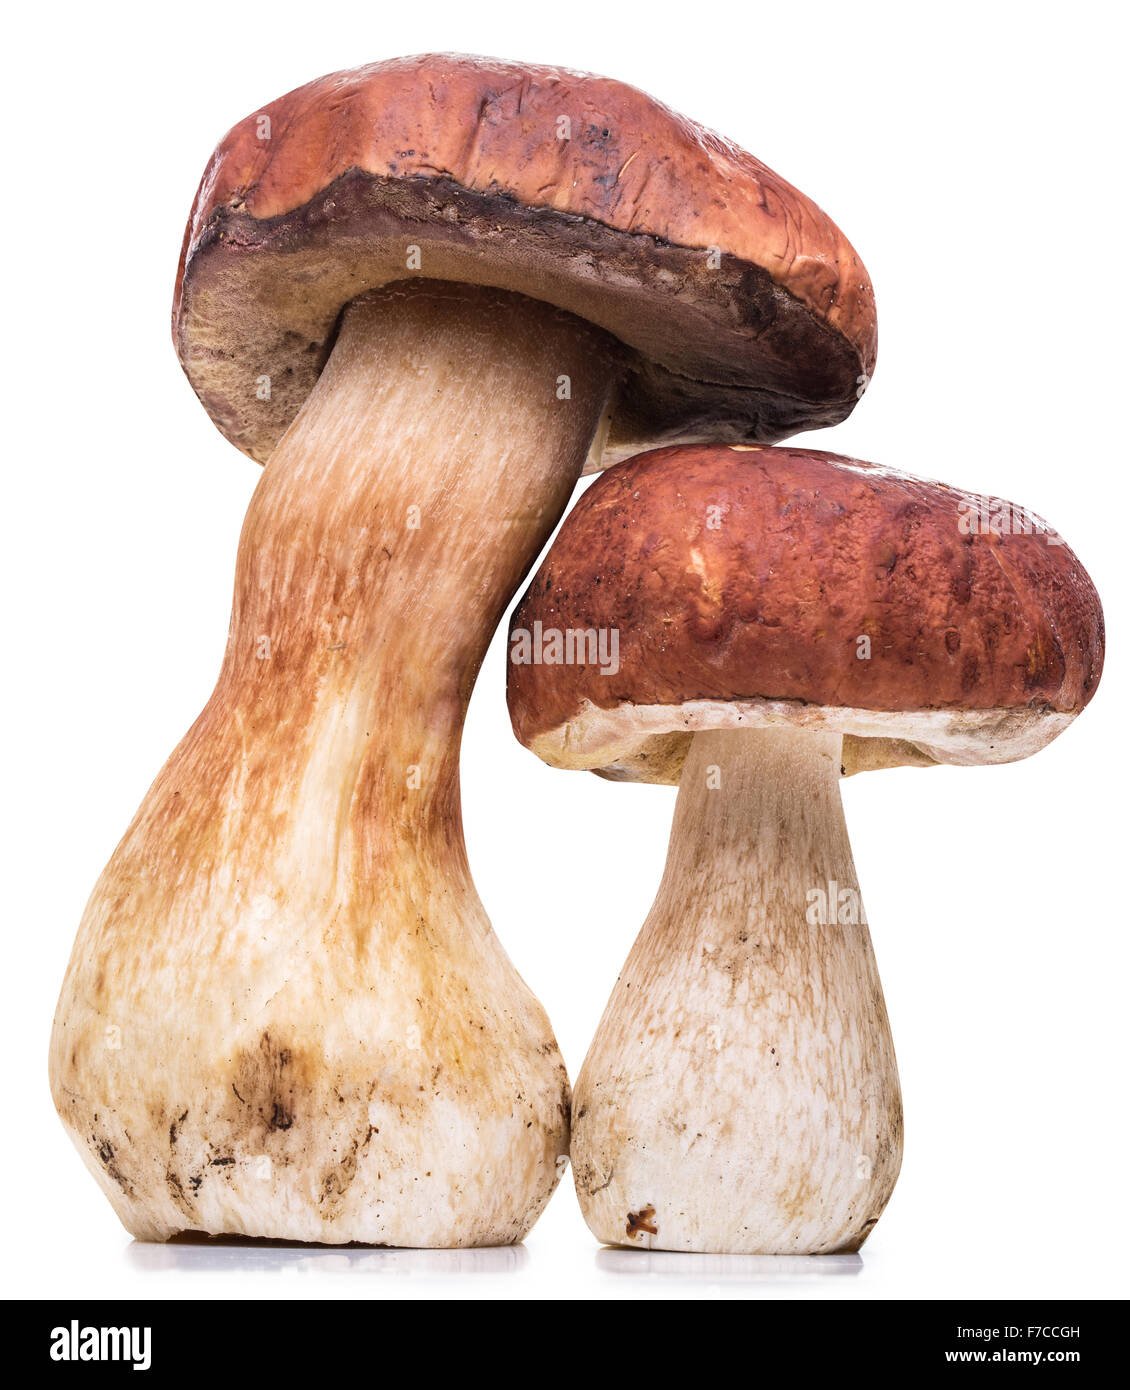 Porcini mushrooms. File contains clipping paths. Stock Photo